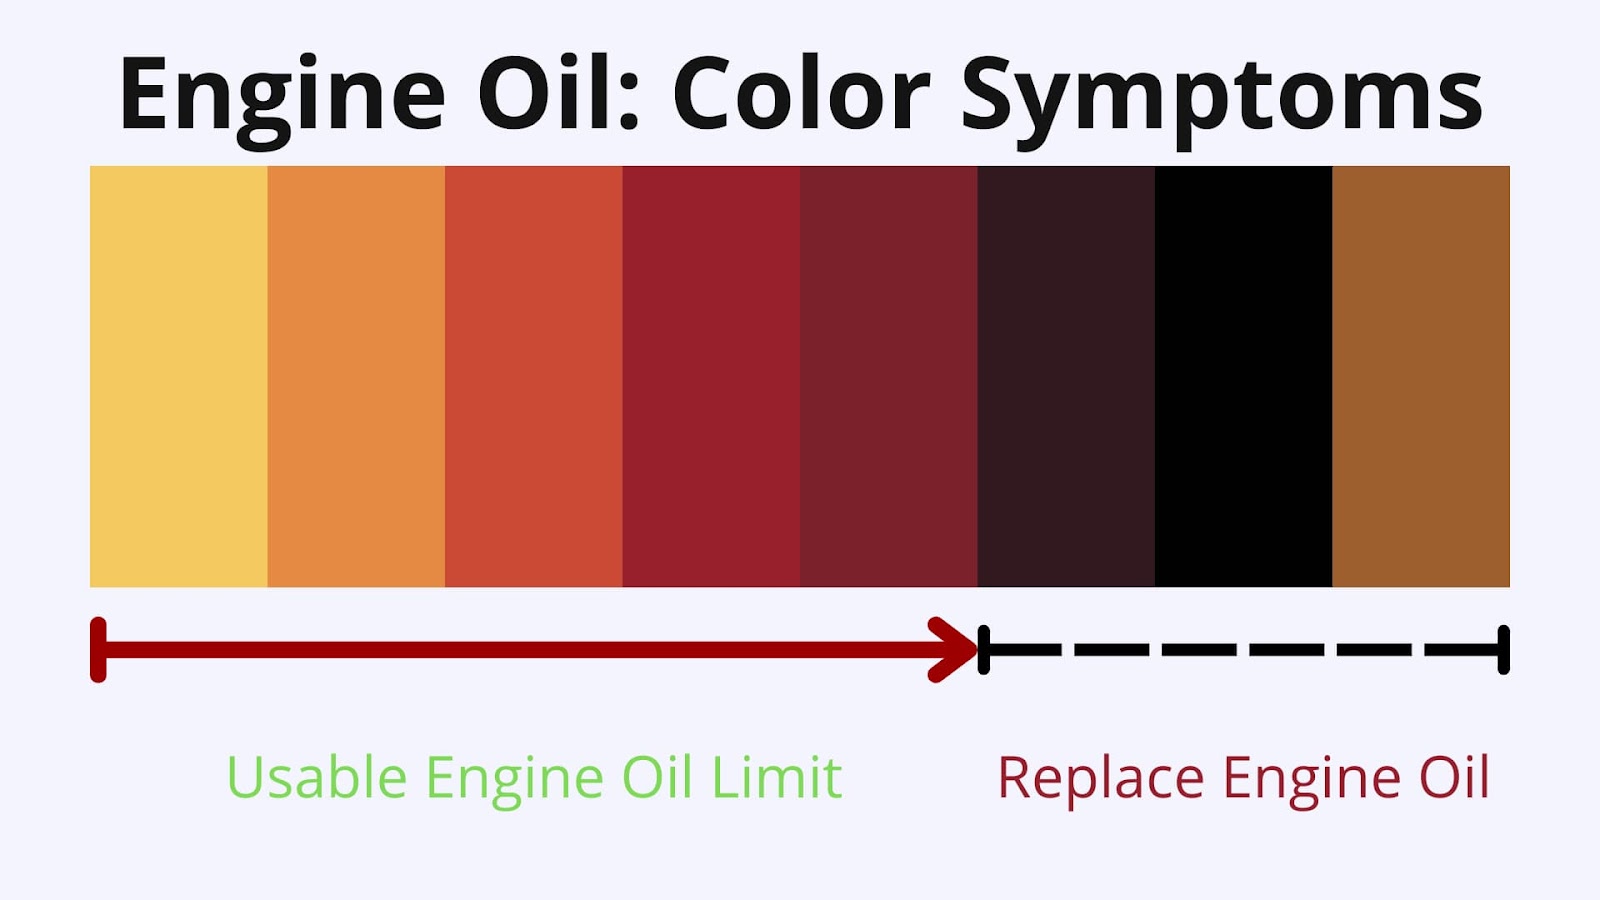 Engine Oil — Color symptoms to compare clean vs. dirty oil. 